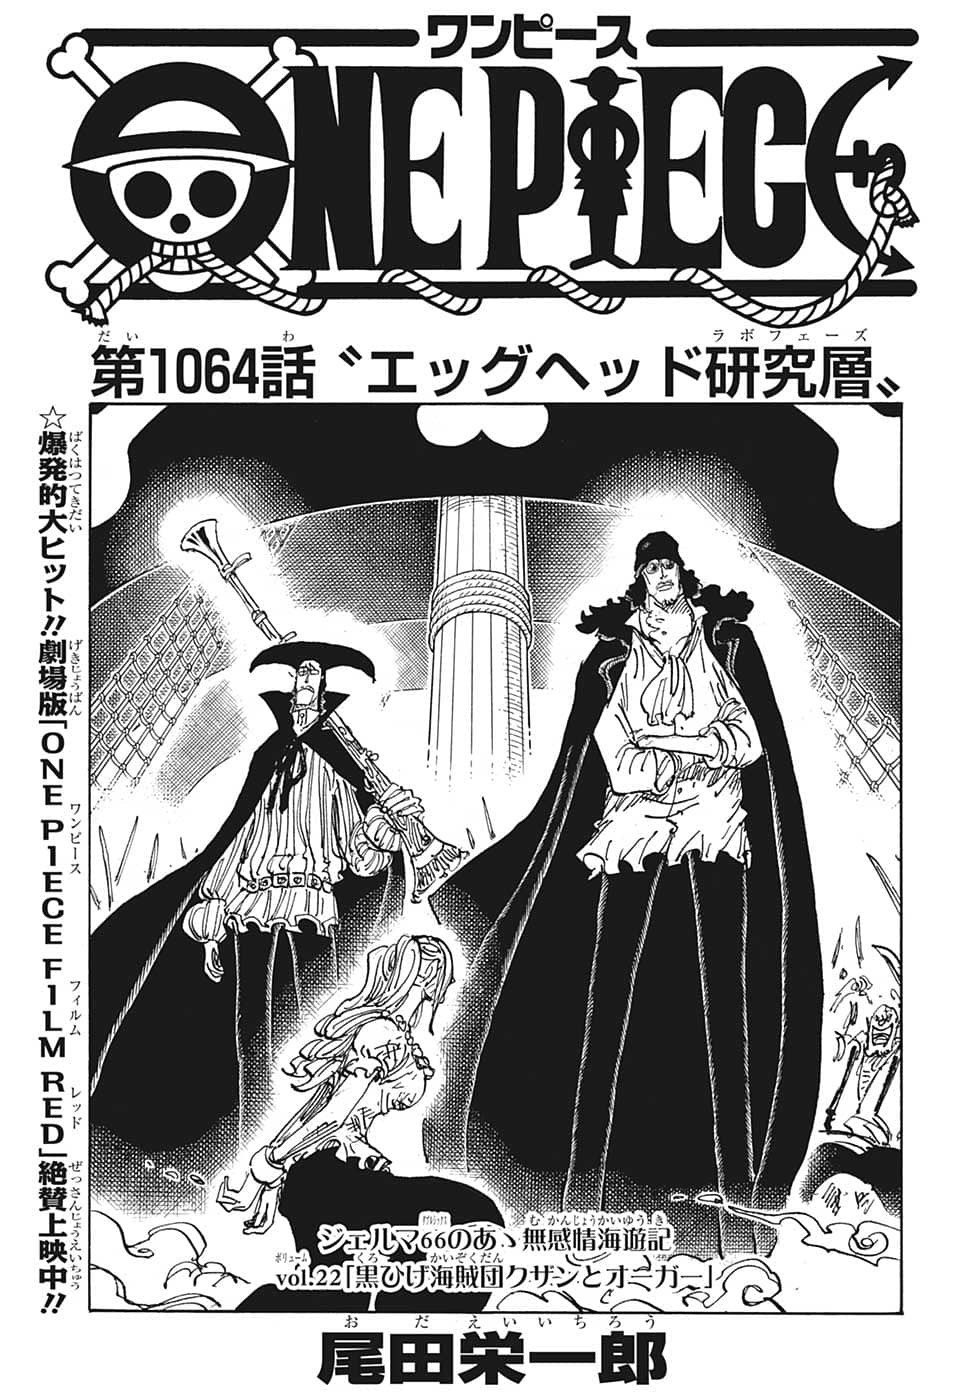 One Piece - Chapter 1064 - Page 1